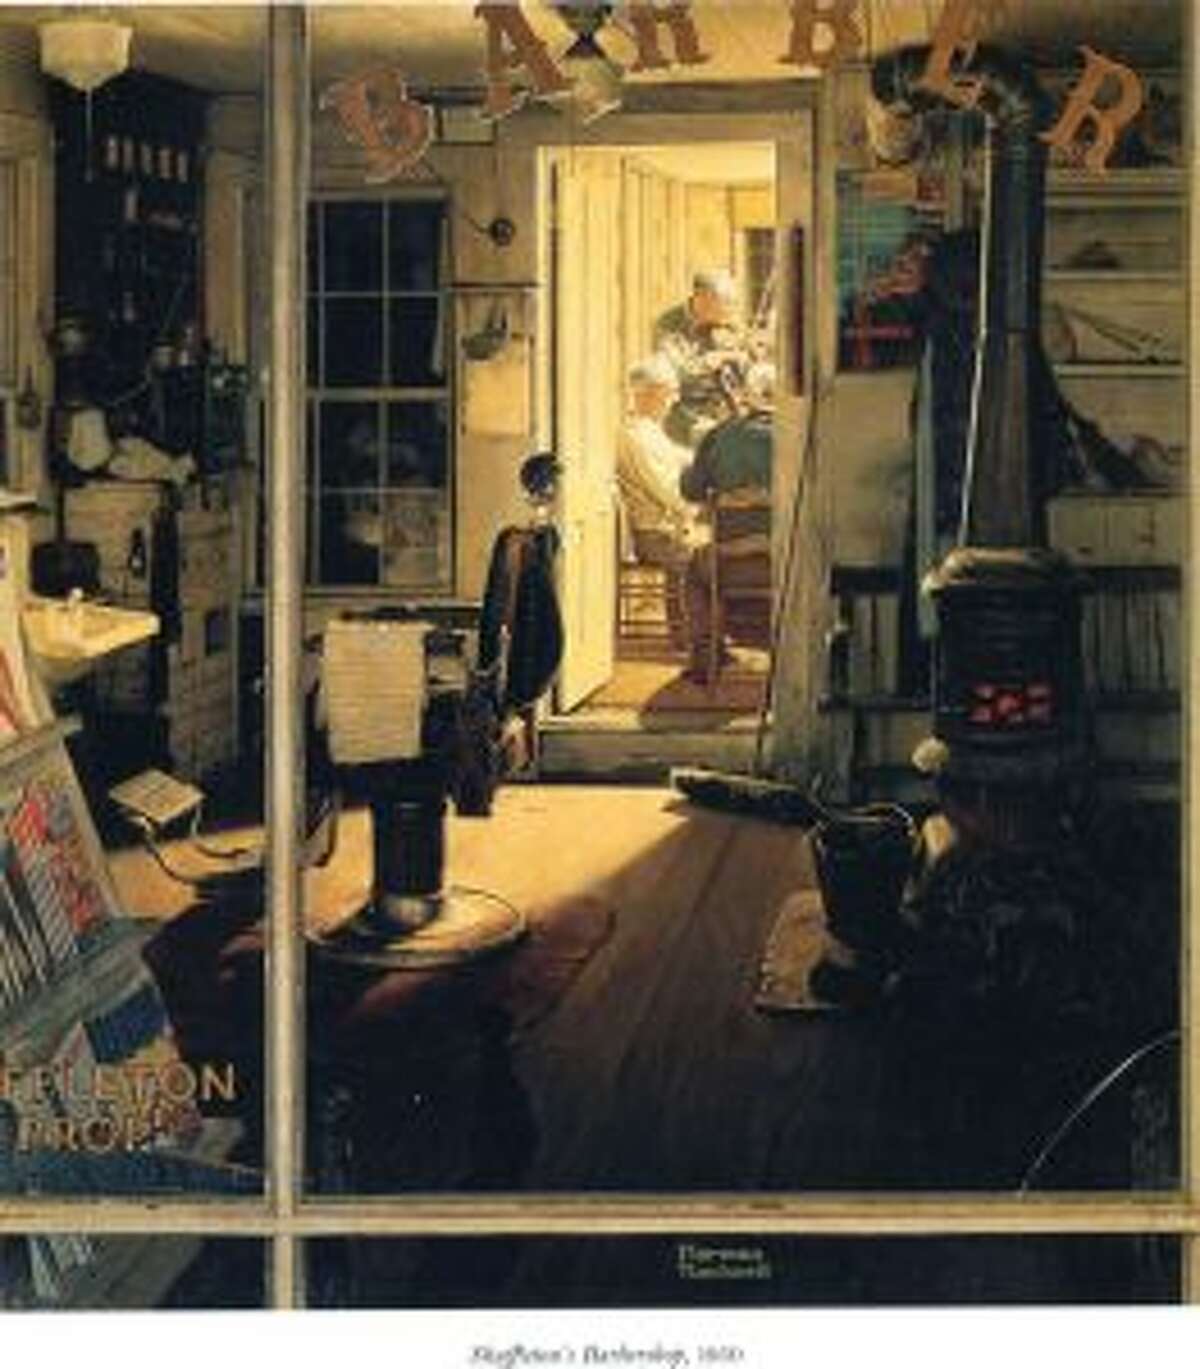 “Shuffleton’s Barbershop” was a Norman Rockwell illustration for the cover of The Saturday Evening Post in 1950. The original painting is among those listed to be auctioned to raise money for the Berkshire Museum.